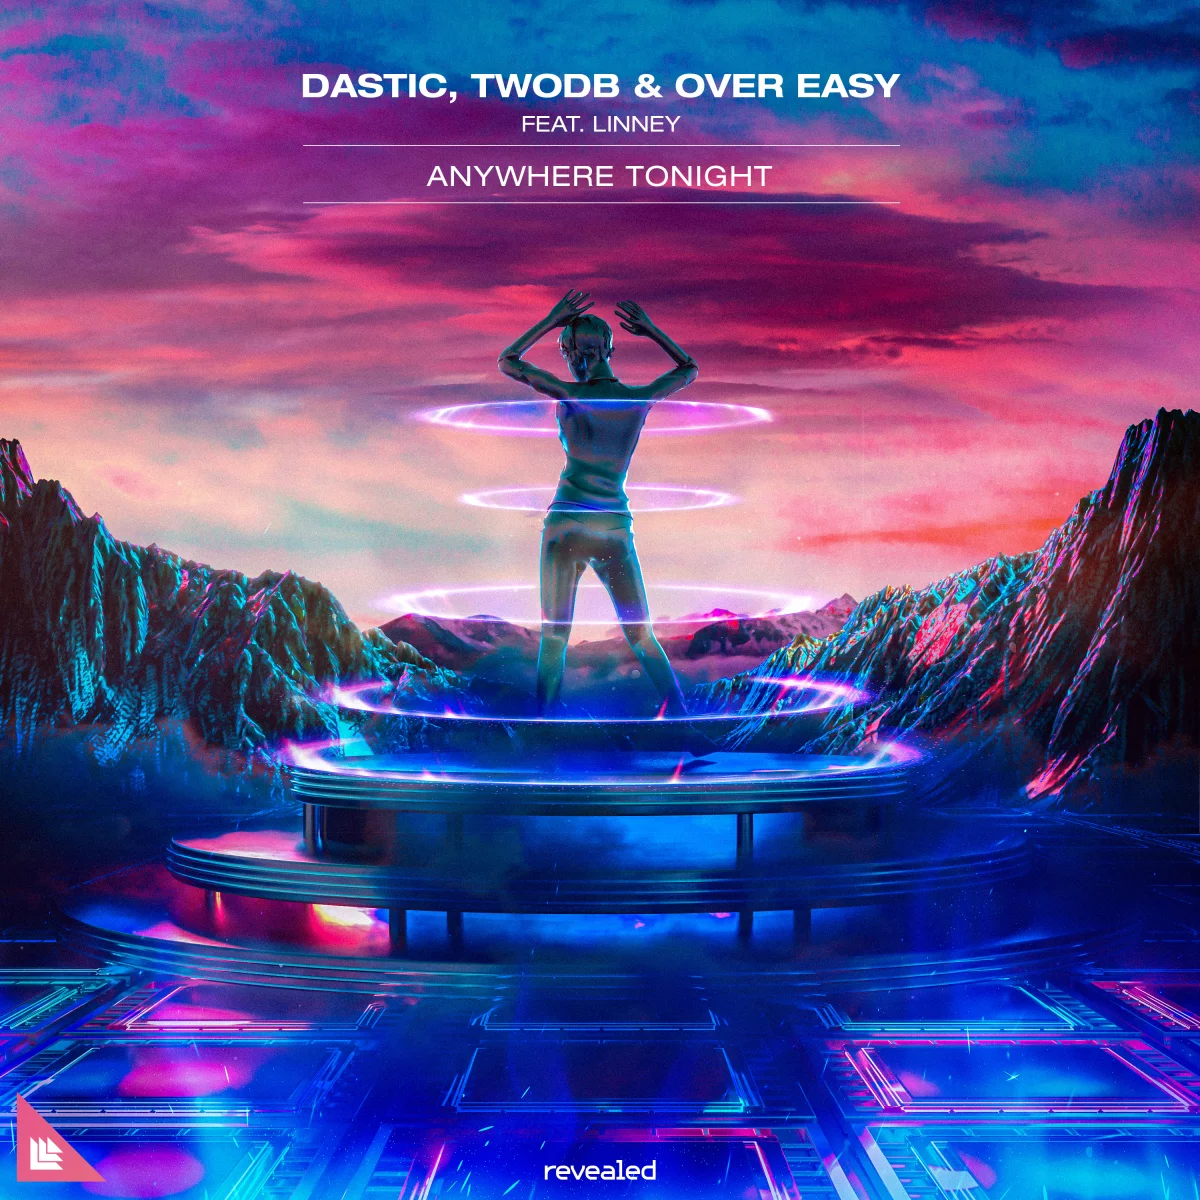 Anywhere Tonight - Dastic⁠, twoDB⁠ & Over Easy⁠ feat. Linney